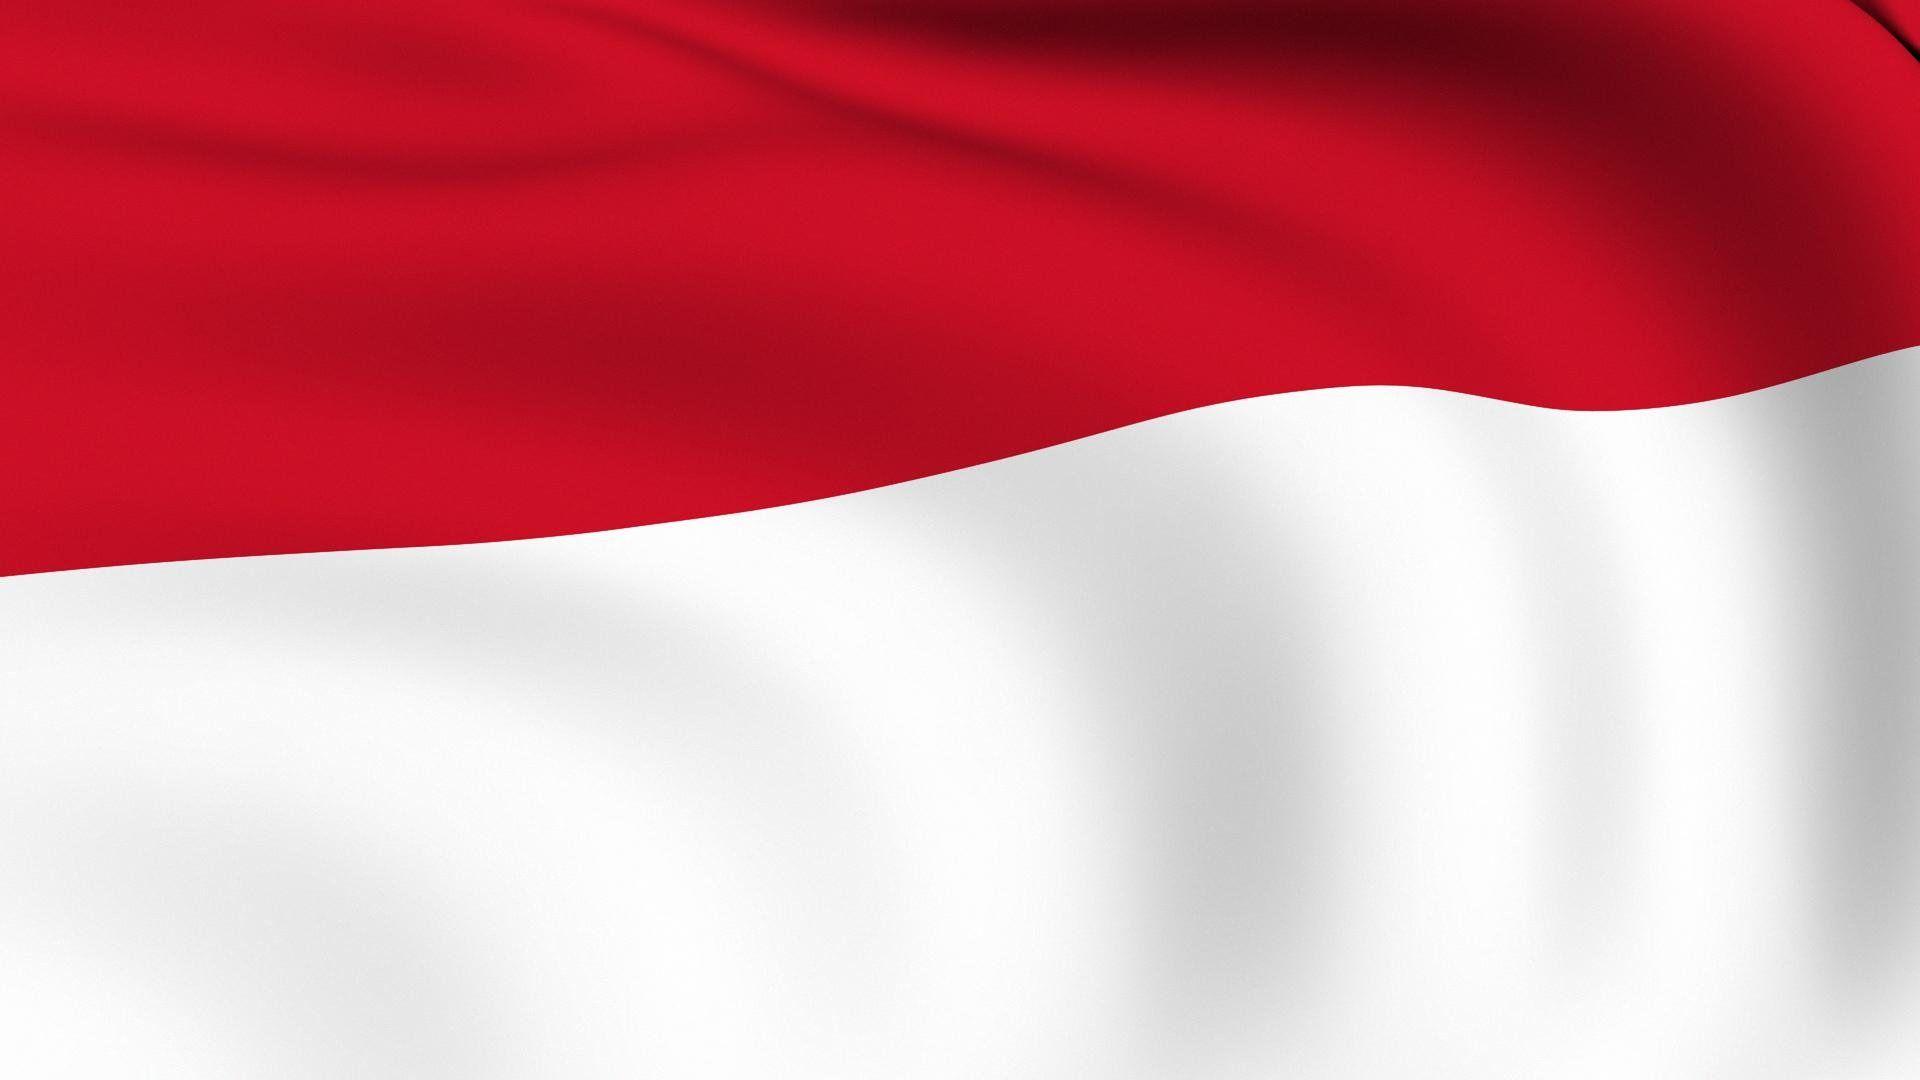 Indonesia Flag Wallpapers Wallpaper Cave